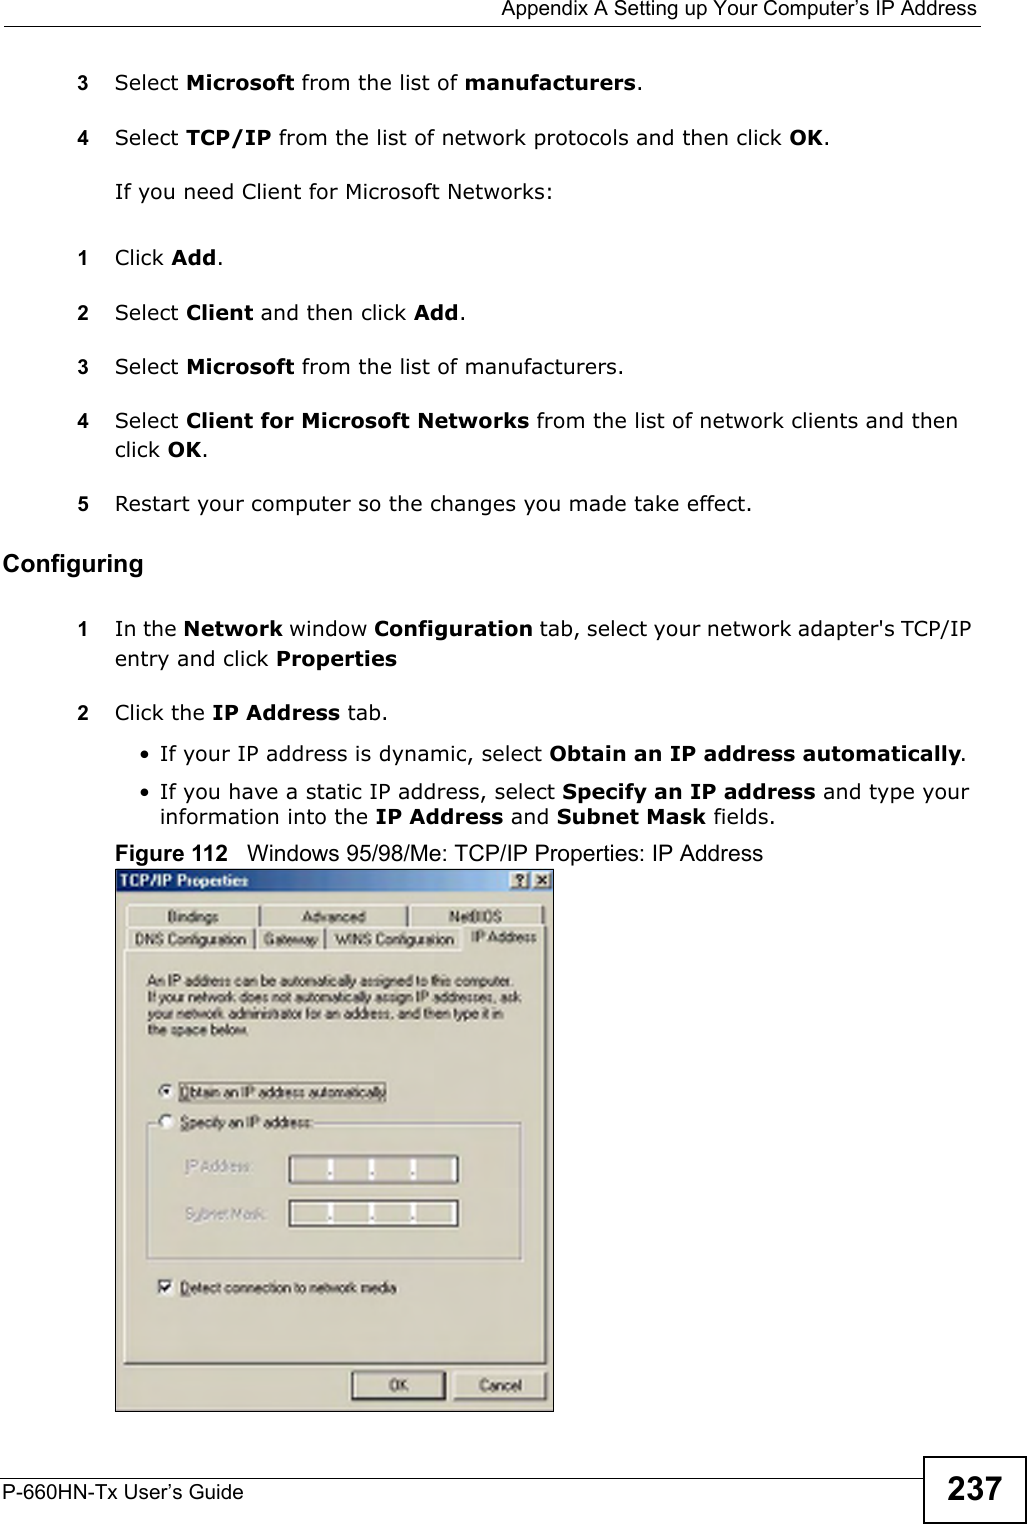  Appendix A Setting up Your Computer’s IP AddressP-660HN-Tx User’s Guide 2373Select Microsoft from the list of manufacturers.4Select TCP/IP from the list of network protocols and then click OK.If you need Client for Microsoft Networks:1Click Add.2Select Client and then click Add.3Select Microsoft from the list of manufacturers.4Select Client for Microsoft Networks from the list of network clients and then click OK.5Restart your computer so the changes you made take effect.Configuring 1In the Network window Configuration tab, select your network adapter&apos;s TCP/IP entry and click Properties2Click the IP Address tab.• If your IP address is dynamic, select Obtain an IP address automatically. • If you have a static IP address, select Specify an IP address and type your information into the IP Address and Subnet Mask fields.Figure 112   Windows 95/98/Me: TCP/IP Properties: IP Address